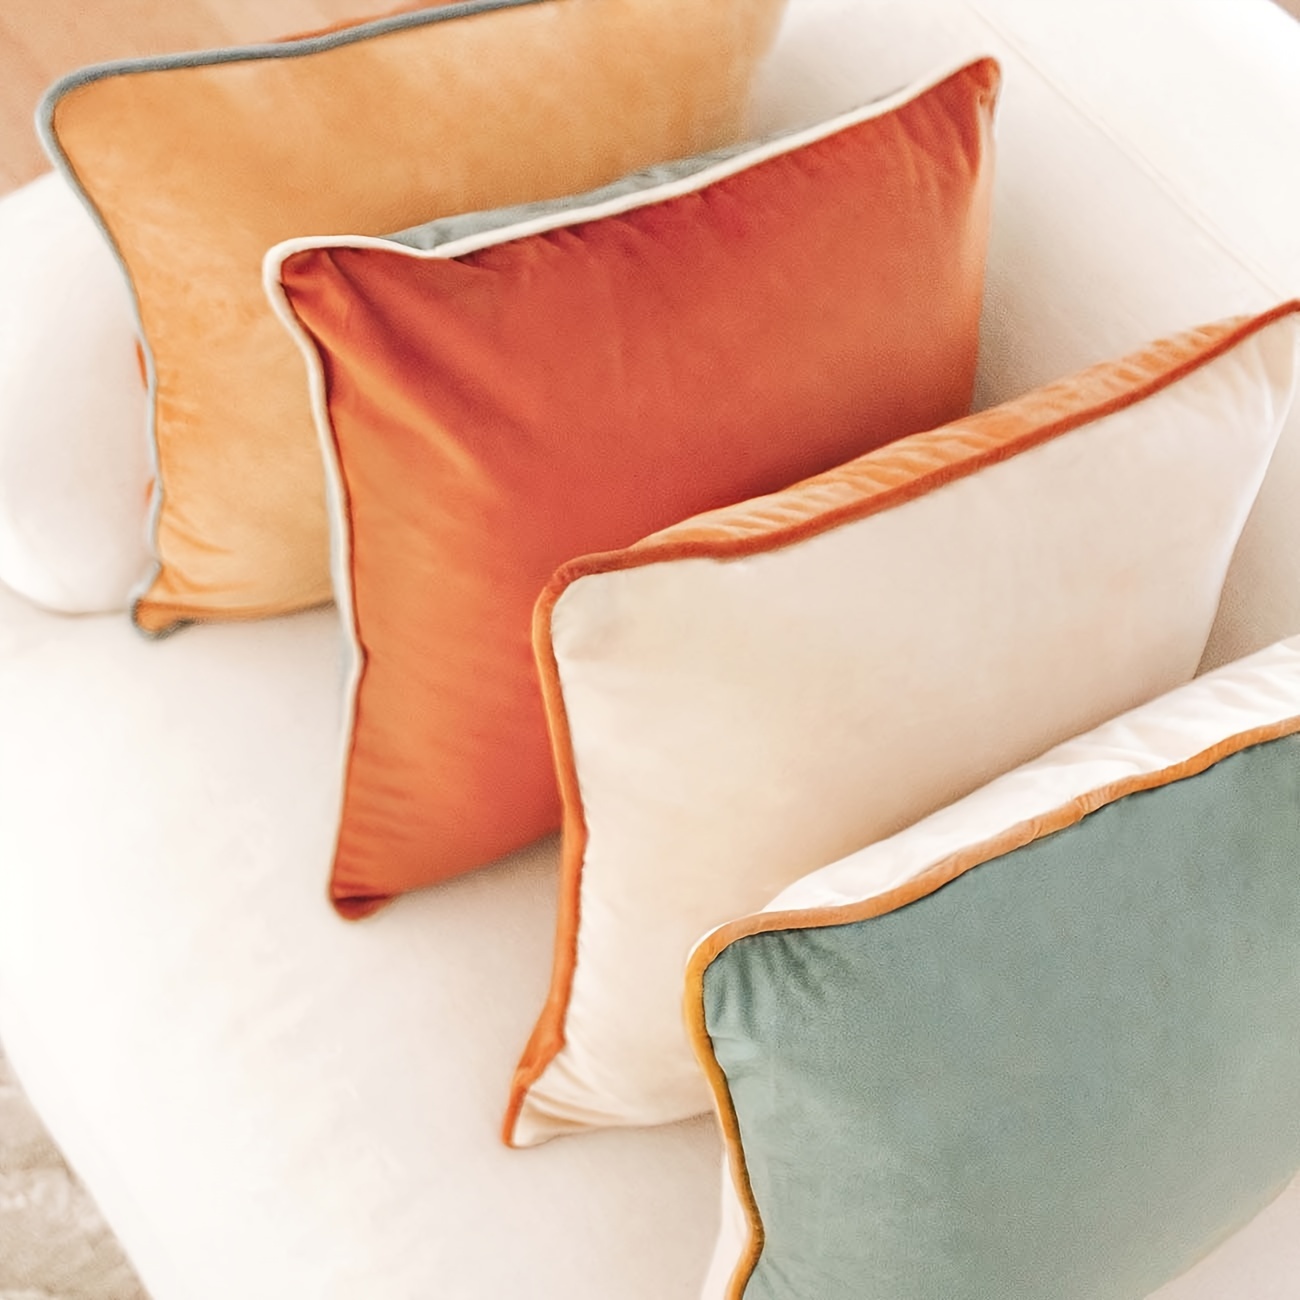 

4pcs Decorative Throw Pillow Covers Cushion Cases, Soft Velvet Modern Double-sided Designs, Mix And Match For Home Decor, Pillow Inserts Not Included (18x18 Inch, Orange/teal)